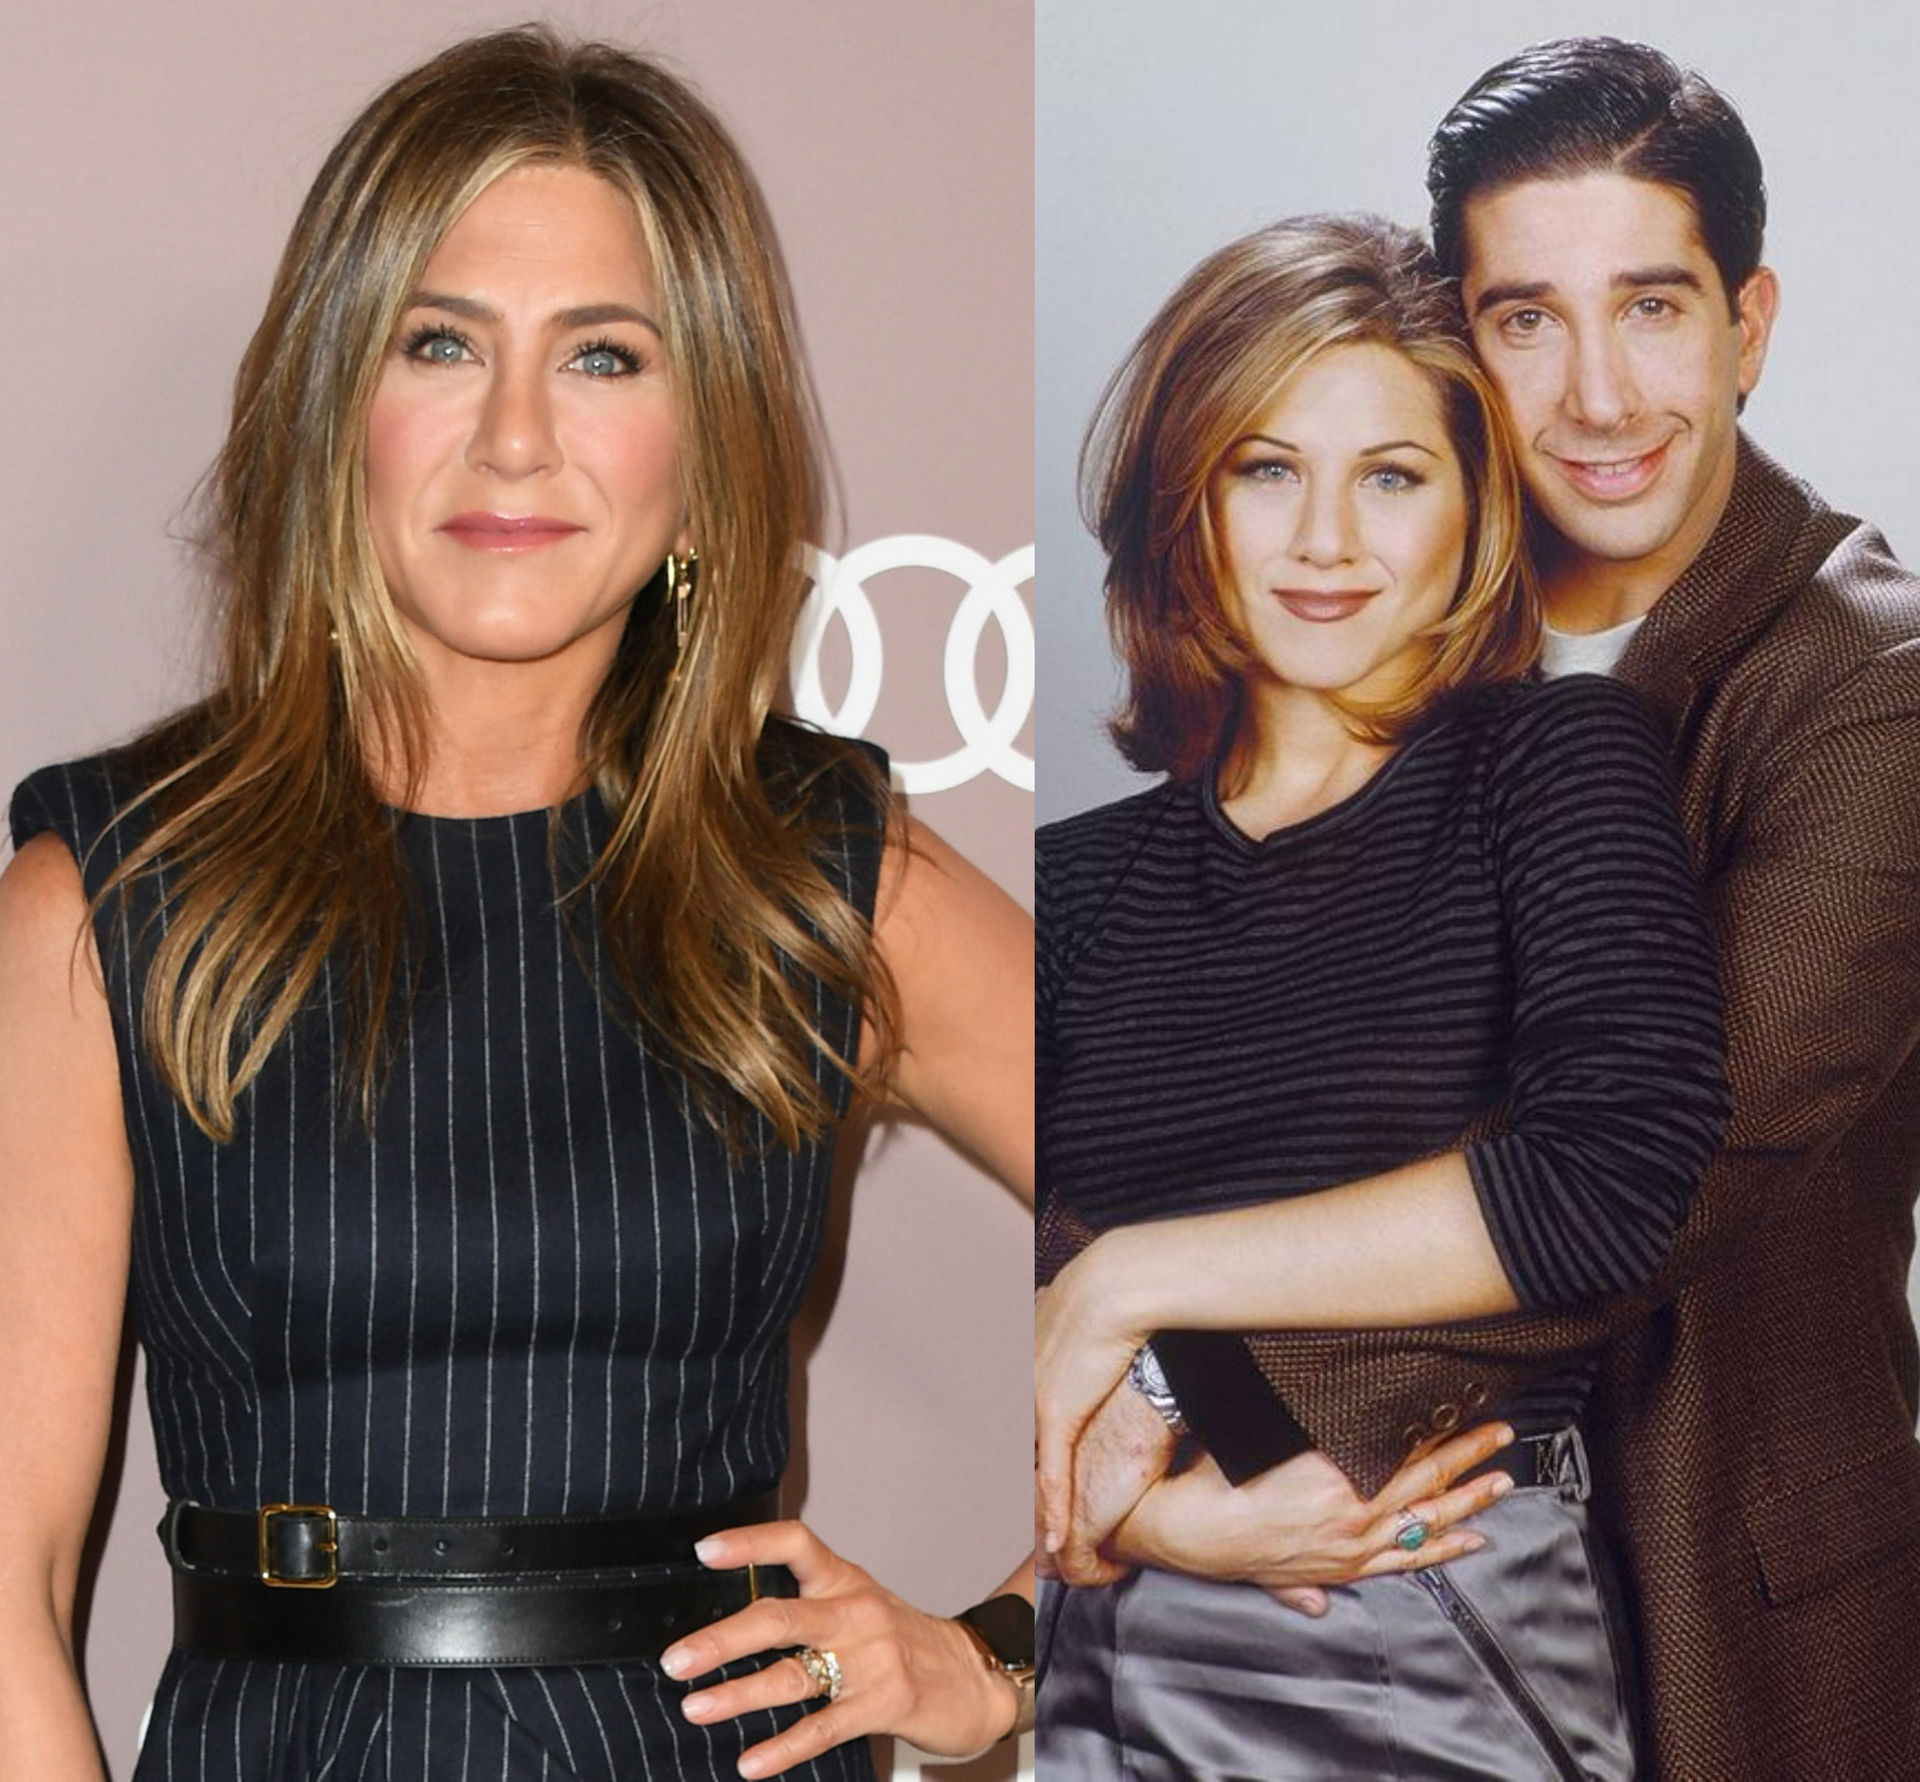 Jennifer Aniston dressed up in her iconic Rachel Green outfit - Masala